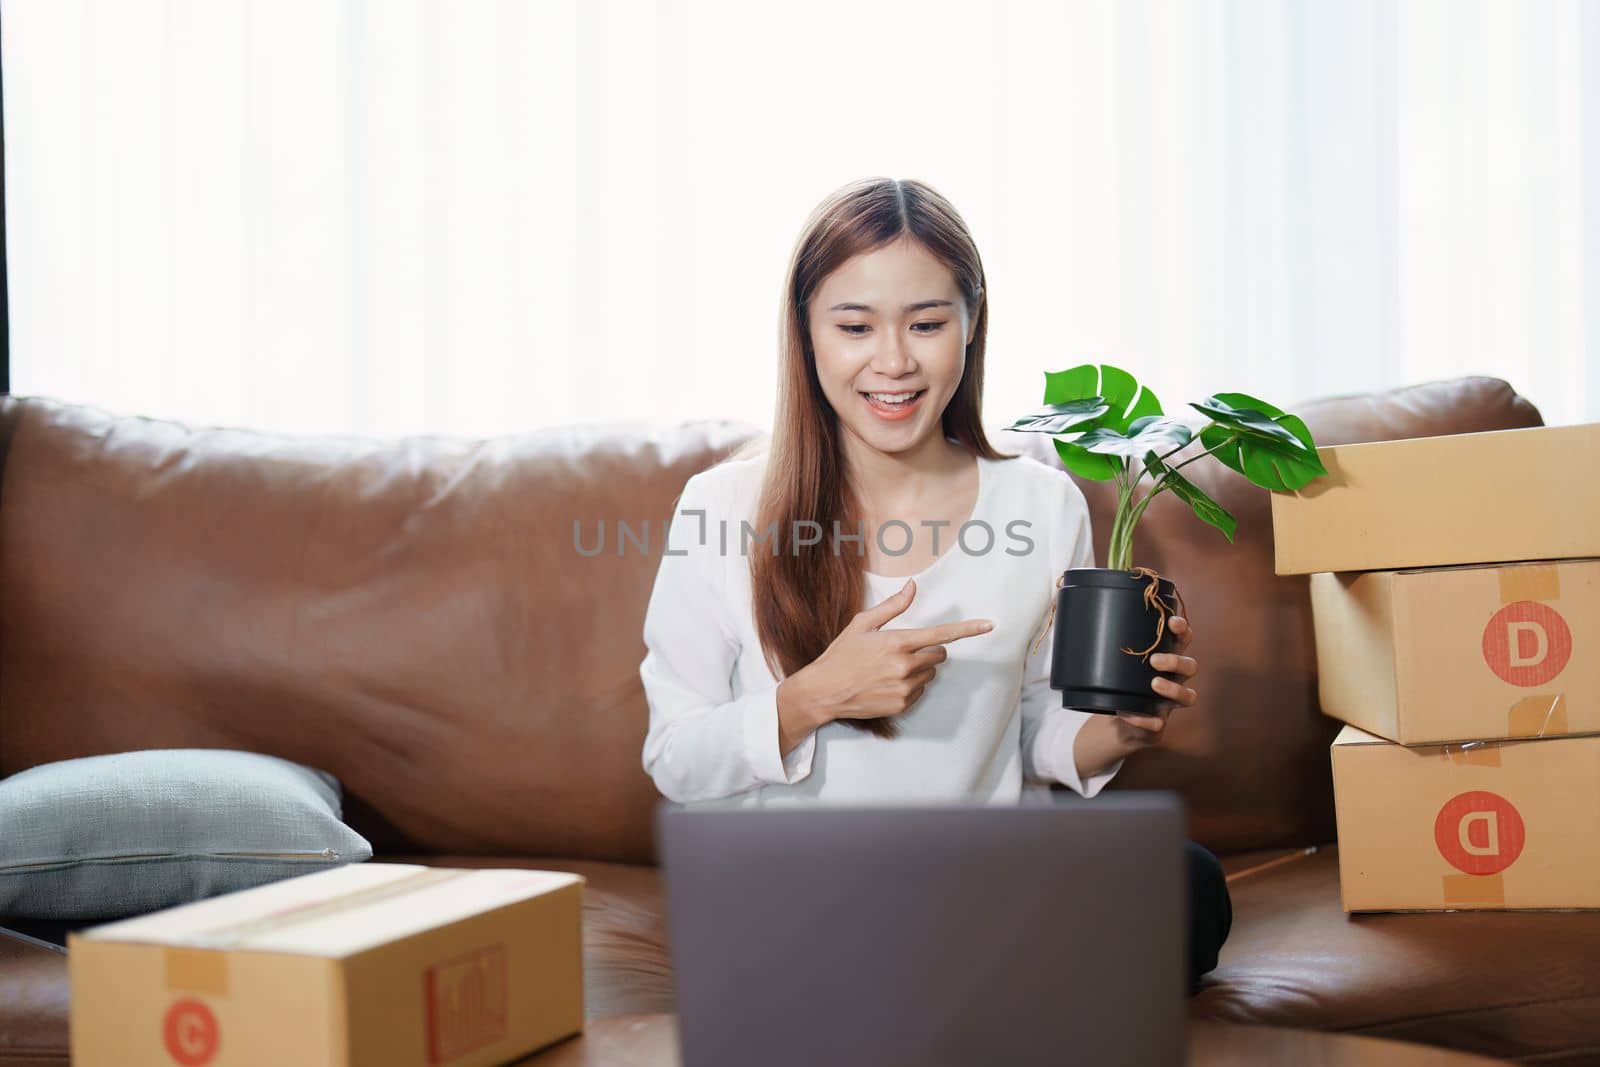 Starting small business entrepreneur of independent young Asian woman online seller using a computer showing products to a customer before making a purchase decision. SME delivery concept by Manastrong